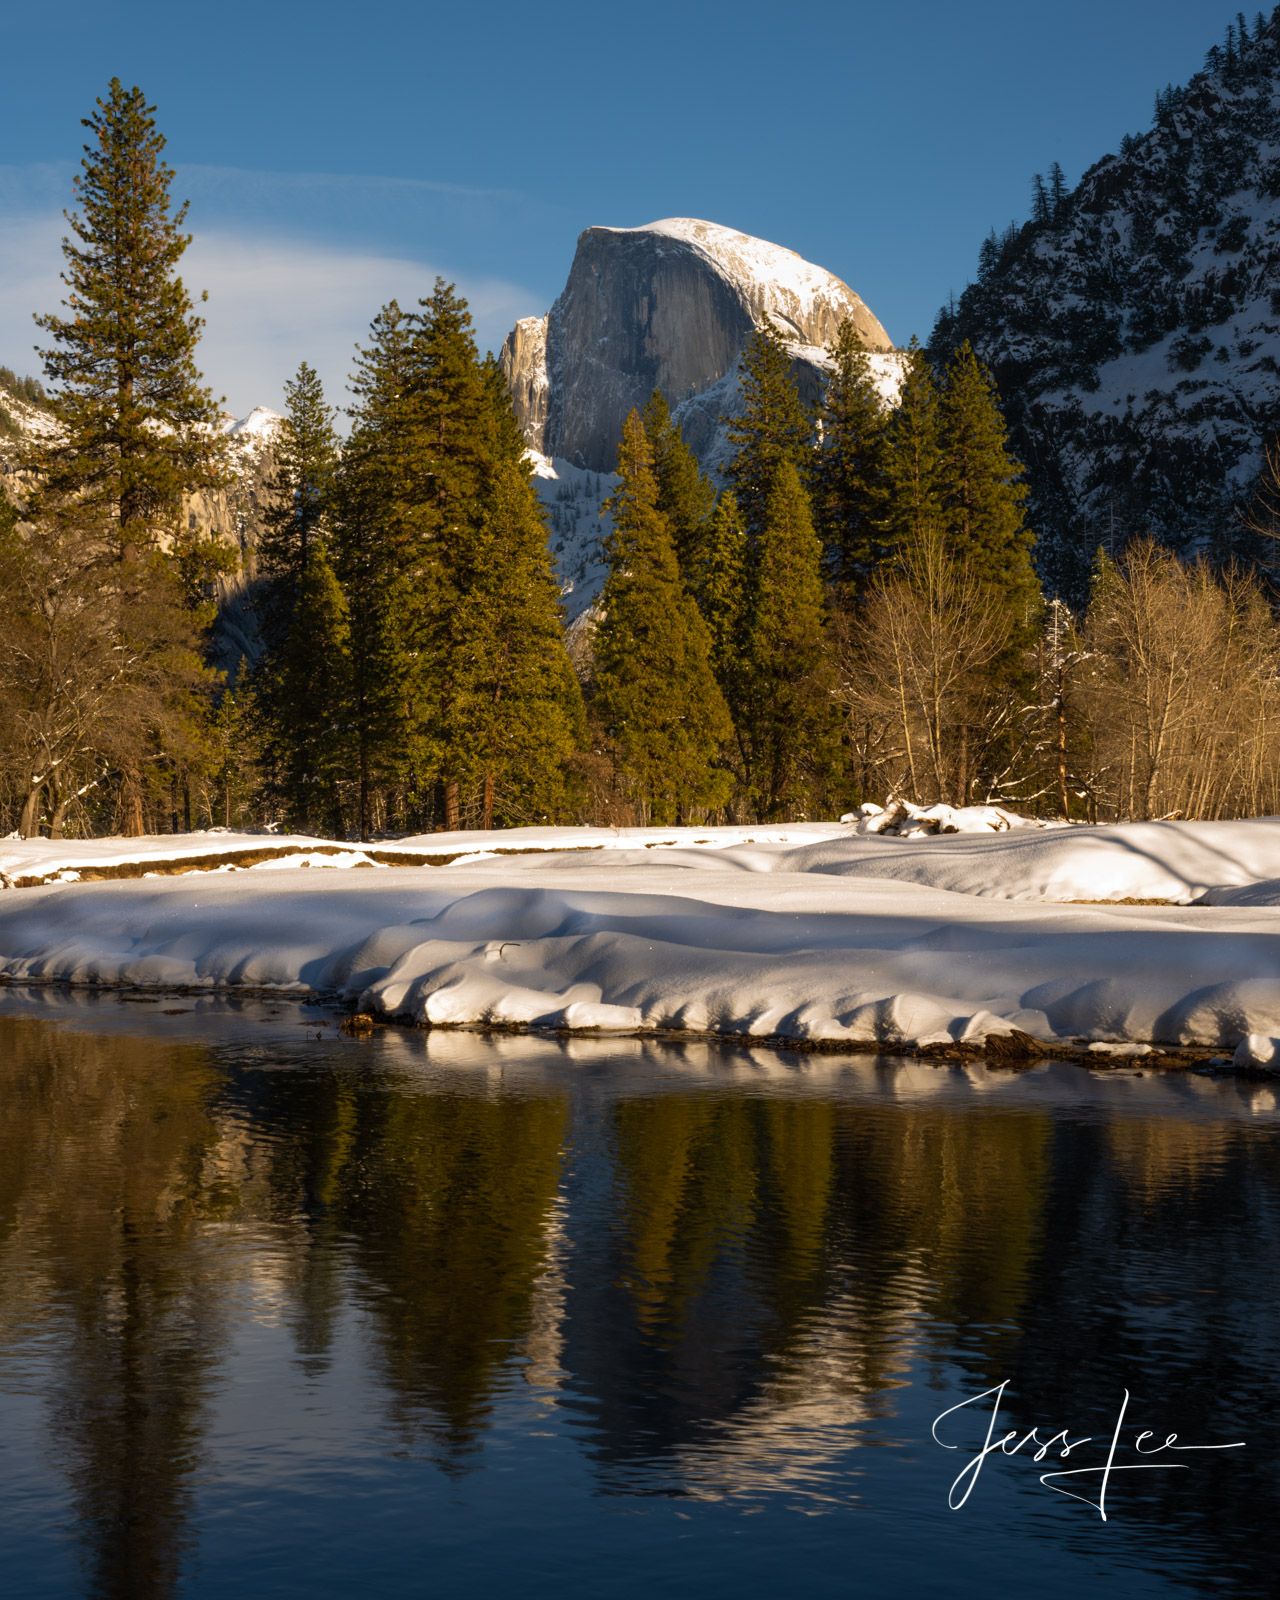 1 of 200 California Landscape Prints of Half Dome on a winter afternoon in Yosemite valley. This is part of the luxurious collection...